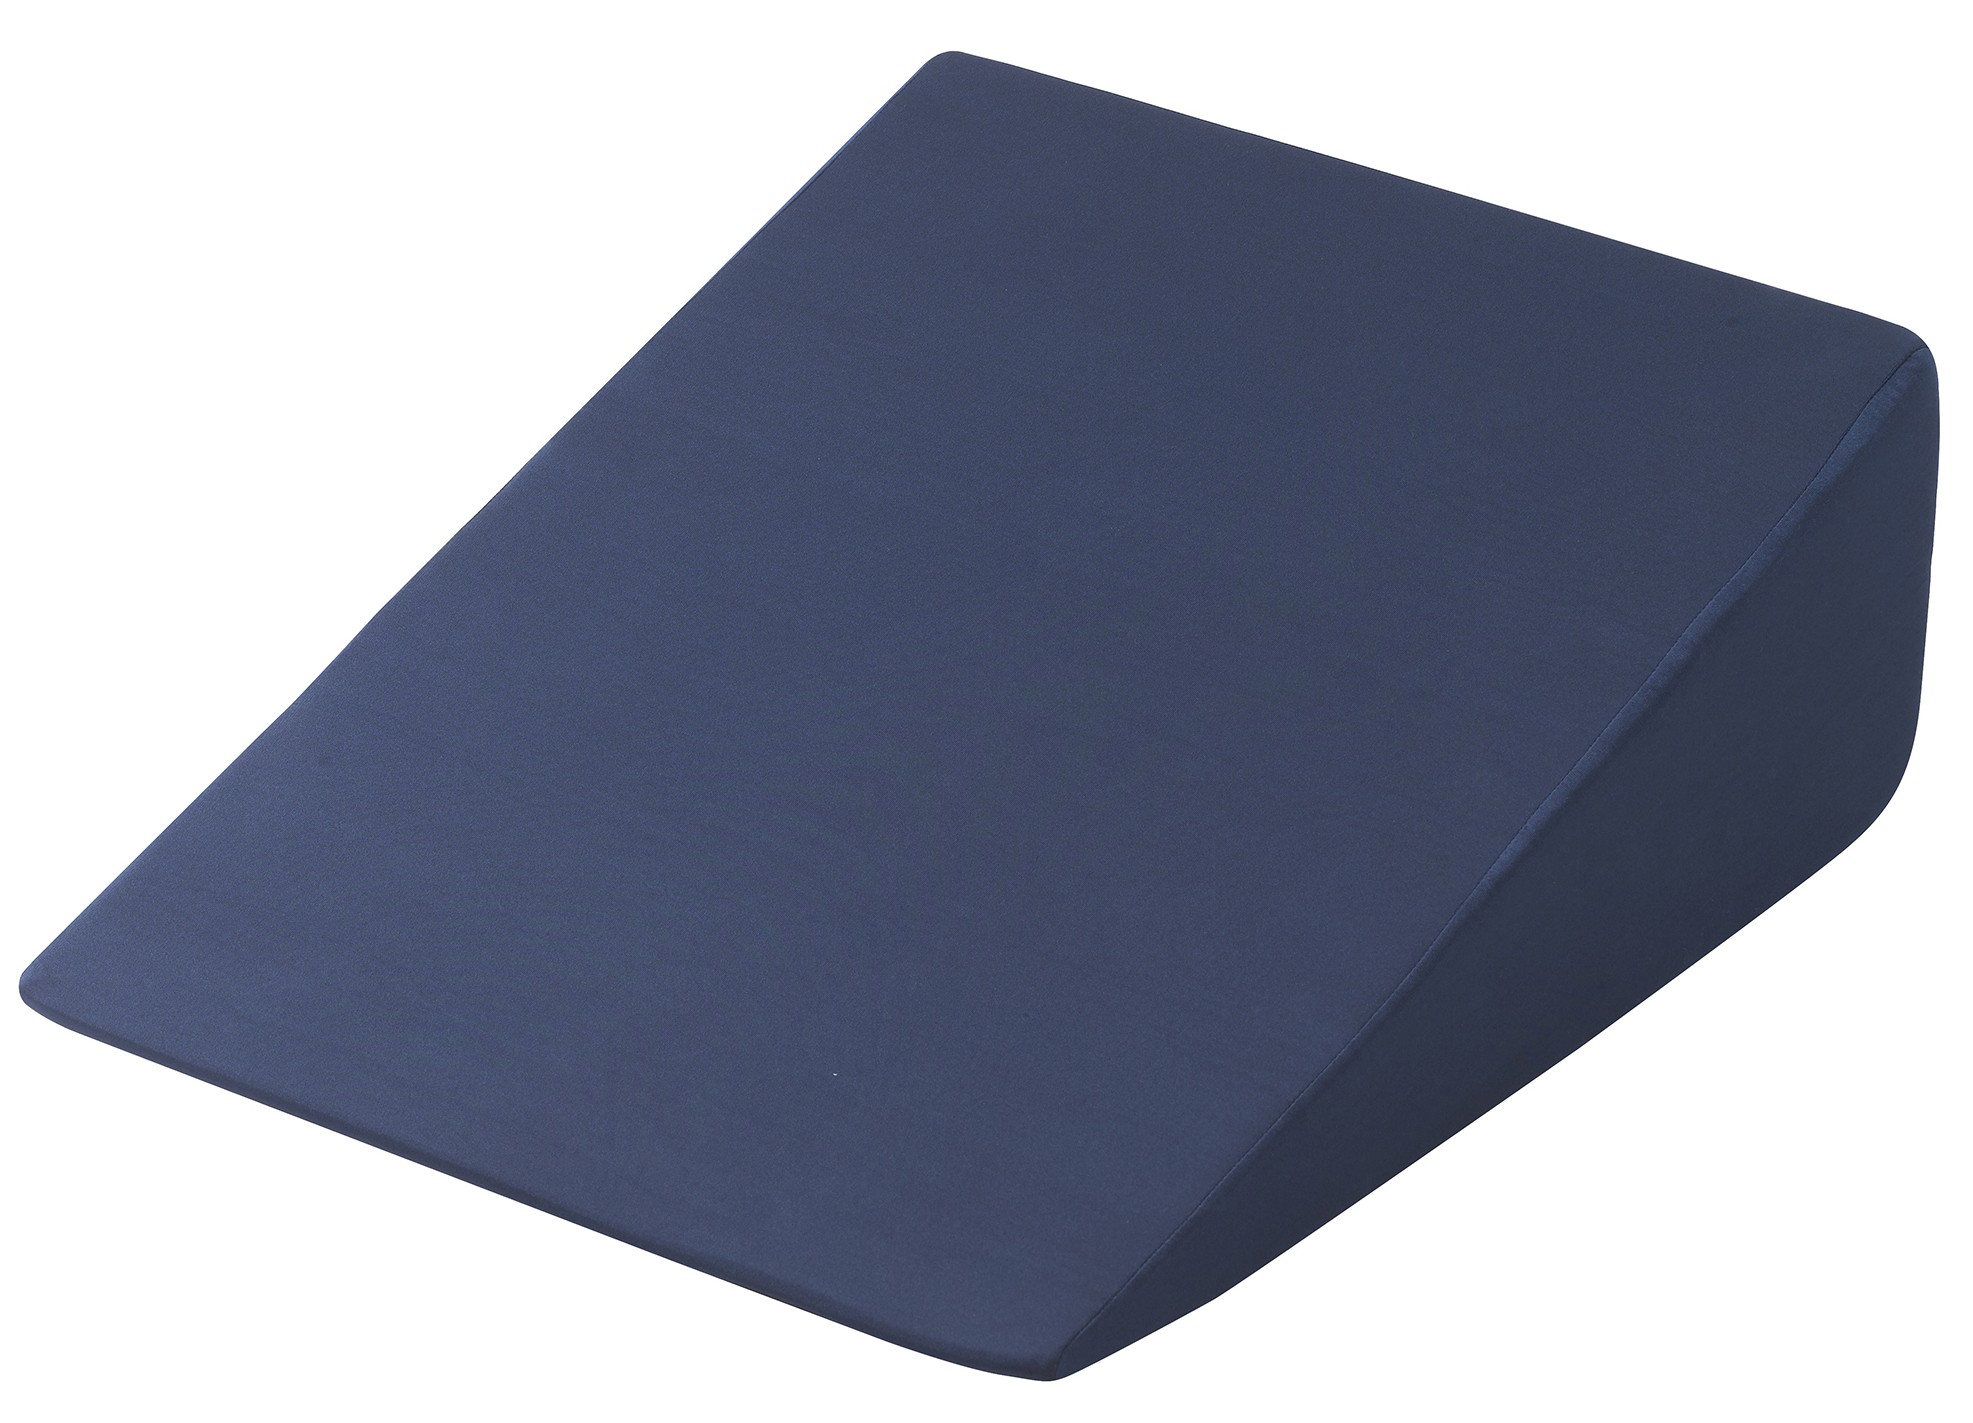 Drive Medical Compressed Bed Wedge Cushion